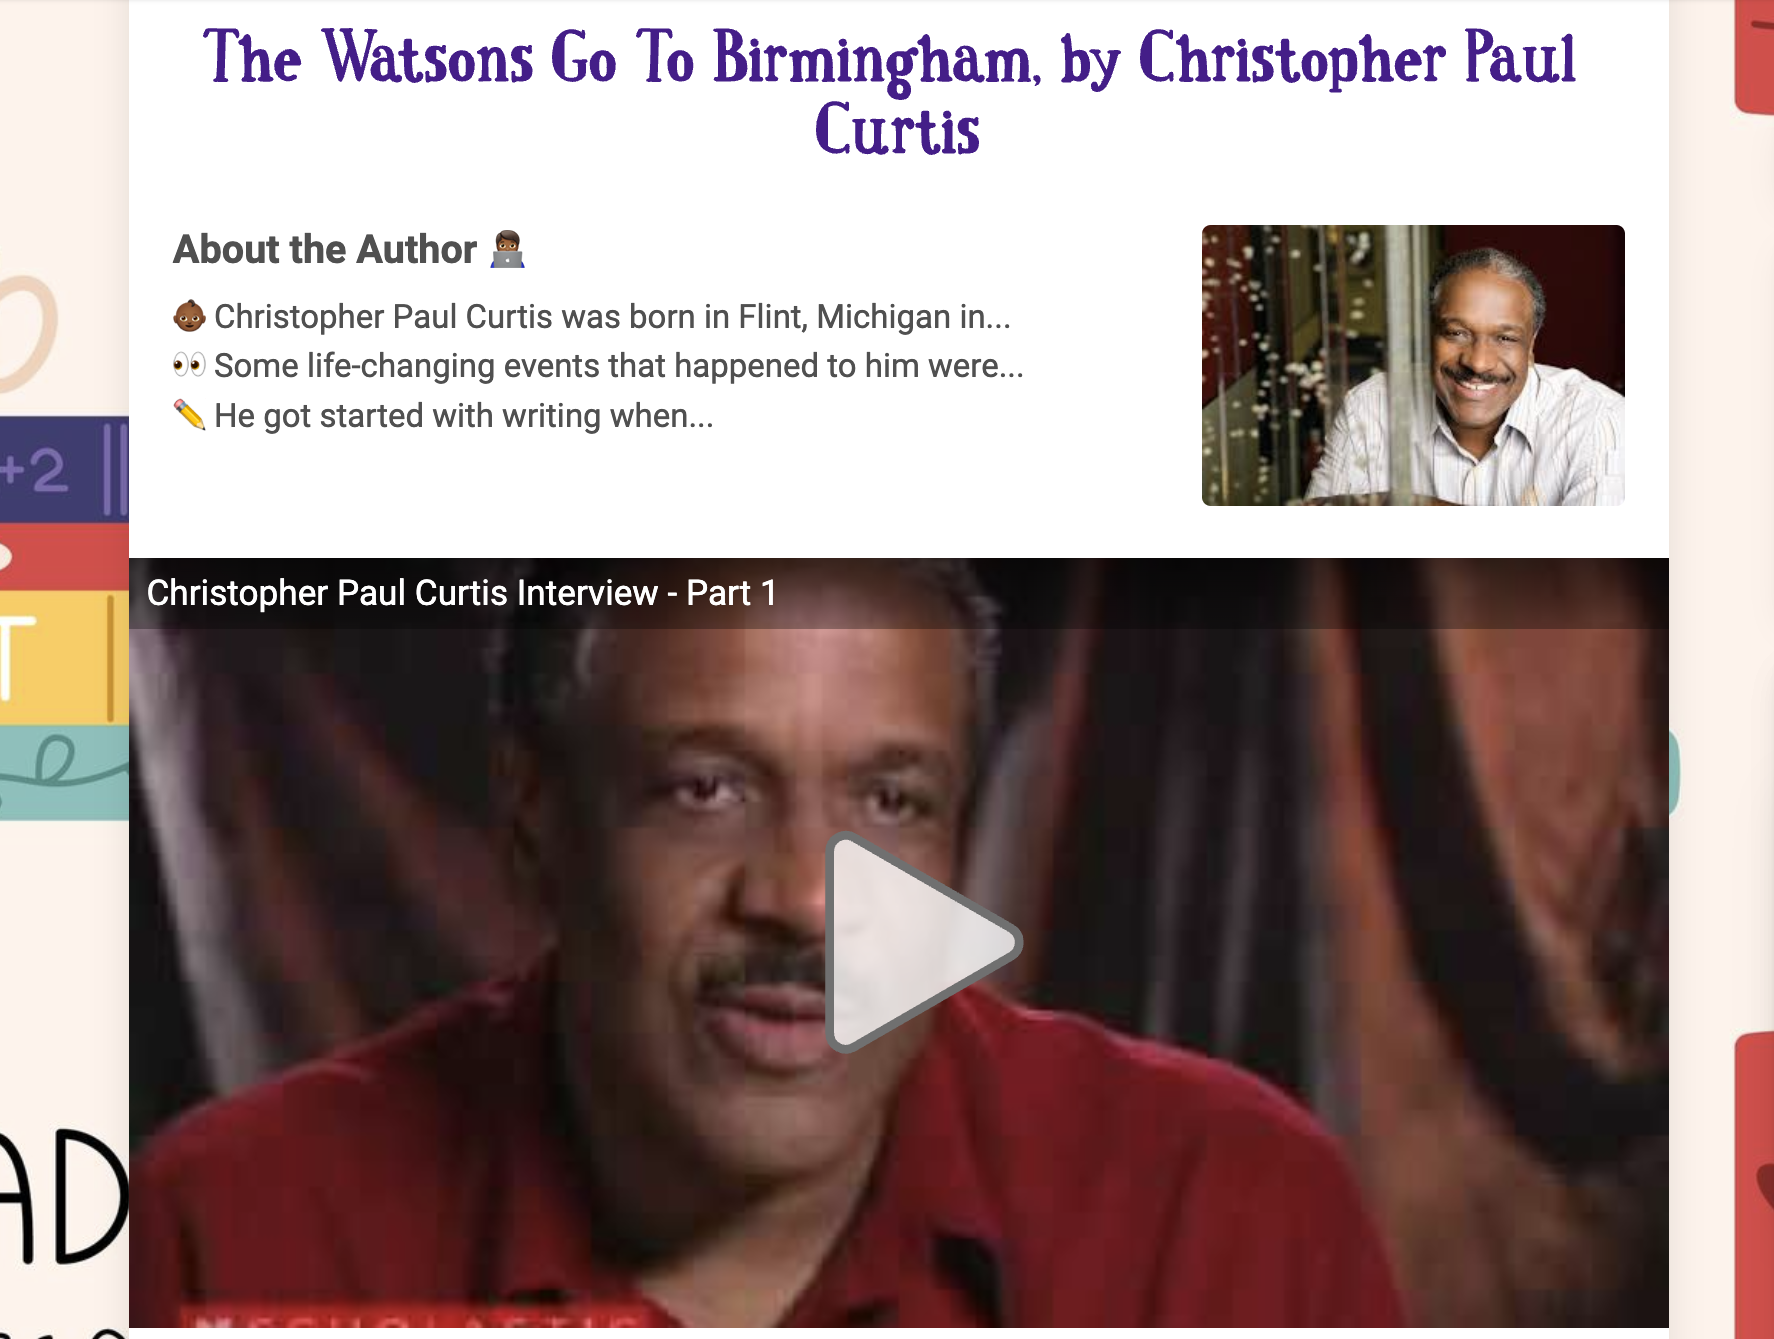 Section of newsletter about the author of The Watsons Go to Birmingham